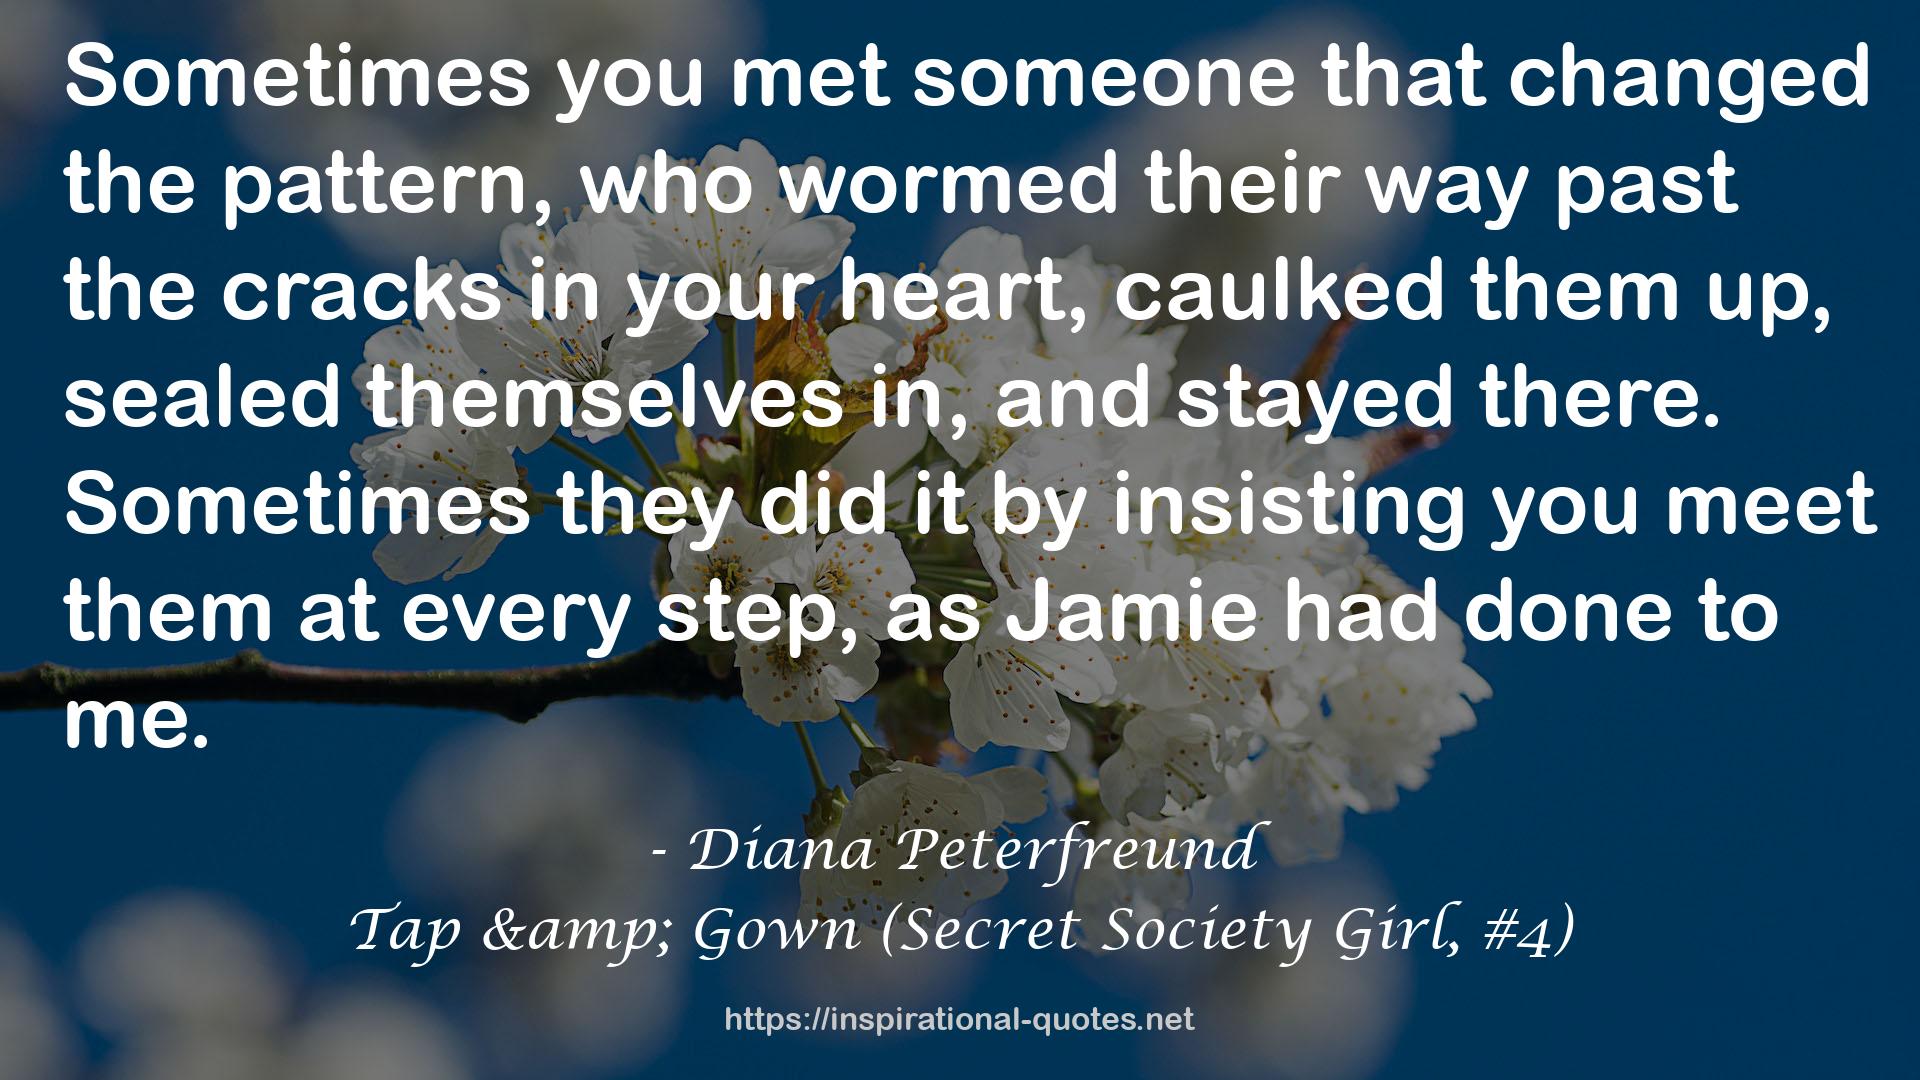 Tap & Gown (Secret Society Girl, #4) QUOTES